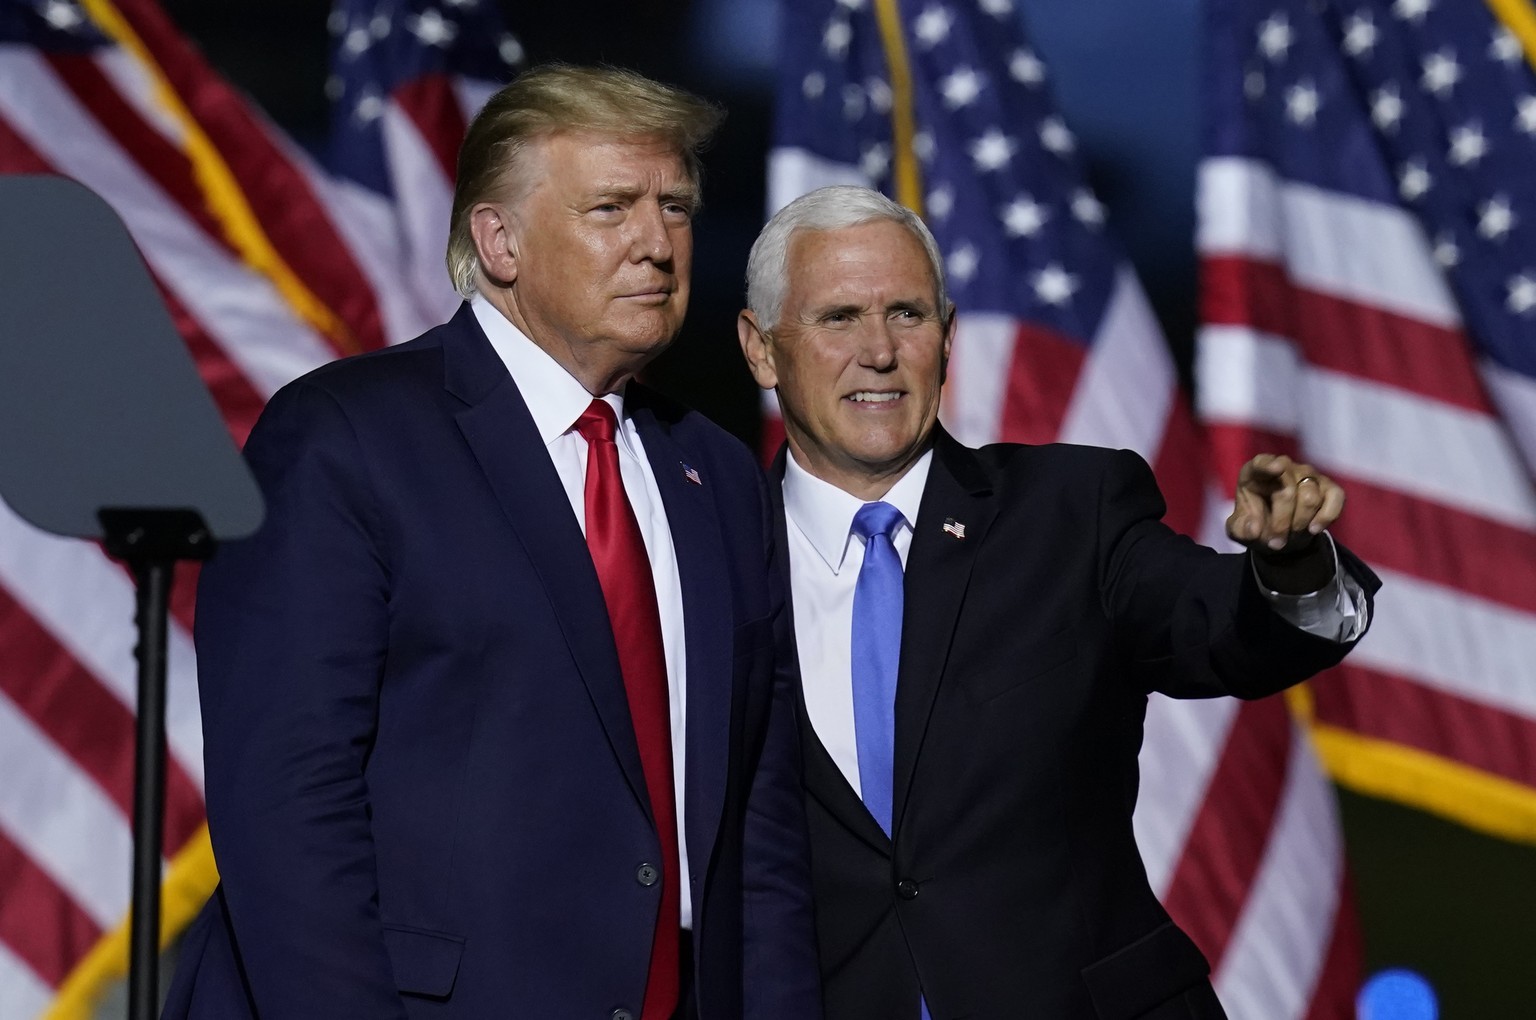 President Donald Trump, left, and Vice President Mike Pence look to the crowd during a campaign rally Friday, Sept. 25, 2020, in Newport News, Va. (AP Photo/Steve Helber)
Donald Trump,Mike Pence